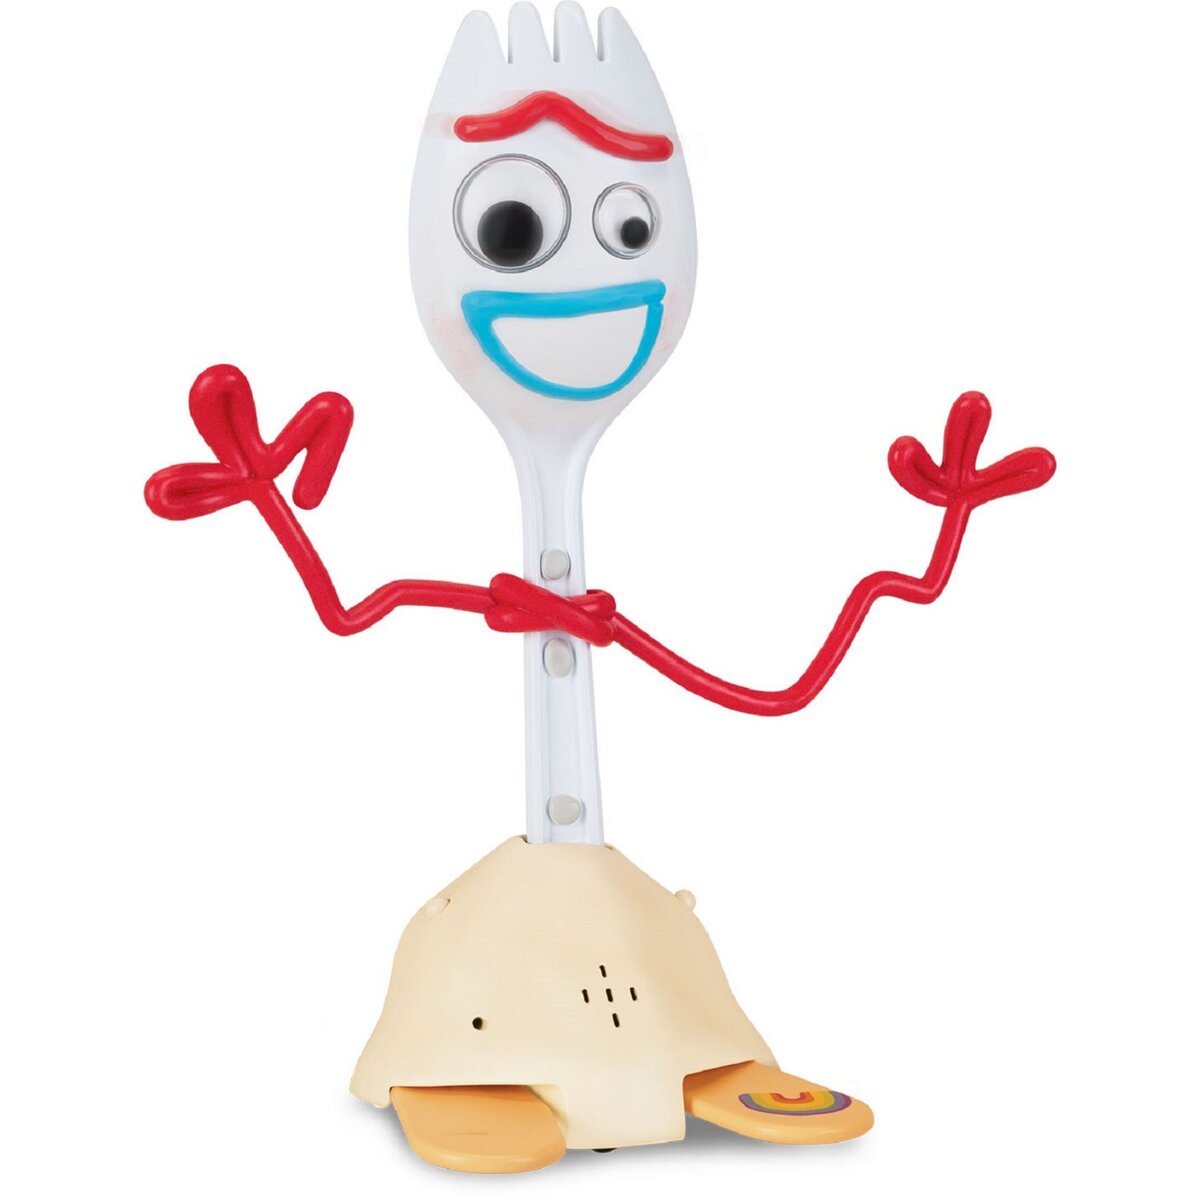 LANSAY Figurine interactive Forky 25 cm - Toy Story 4